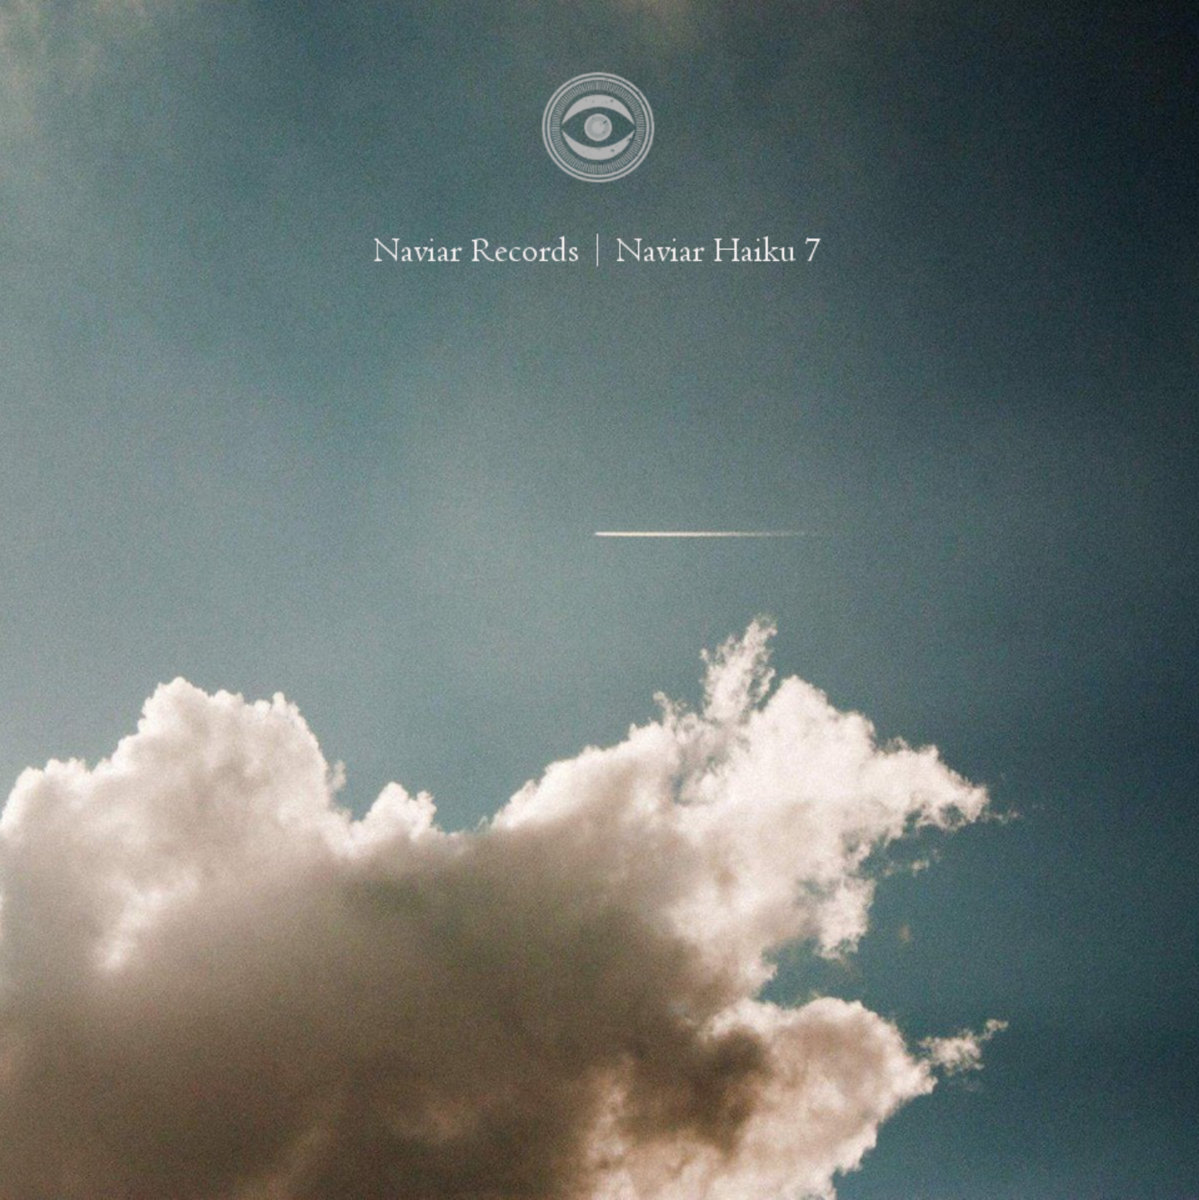 Haik 7 album cover. The image shows a clouds.